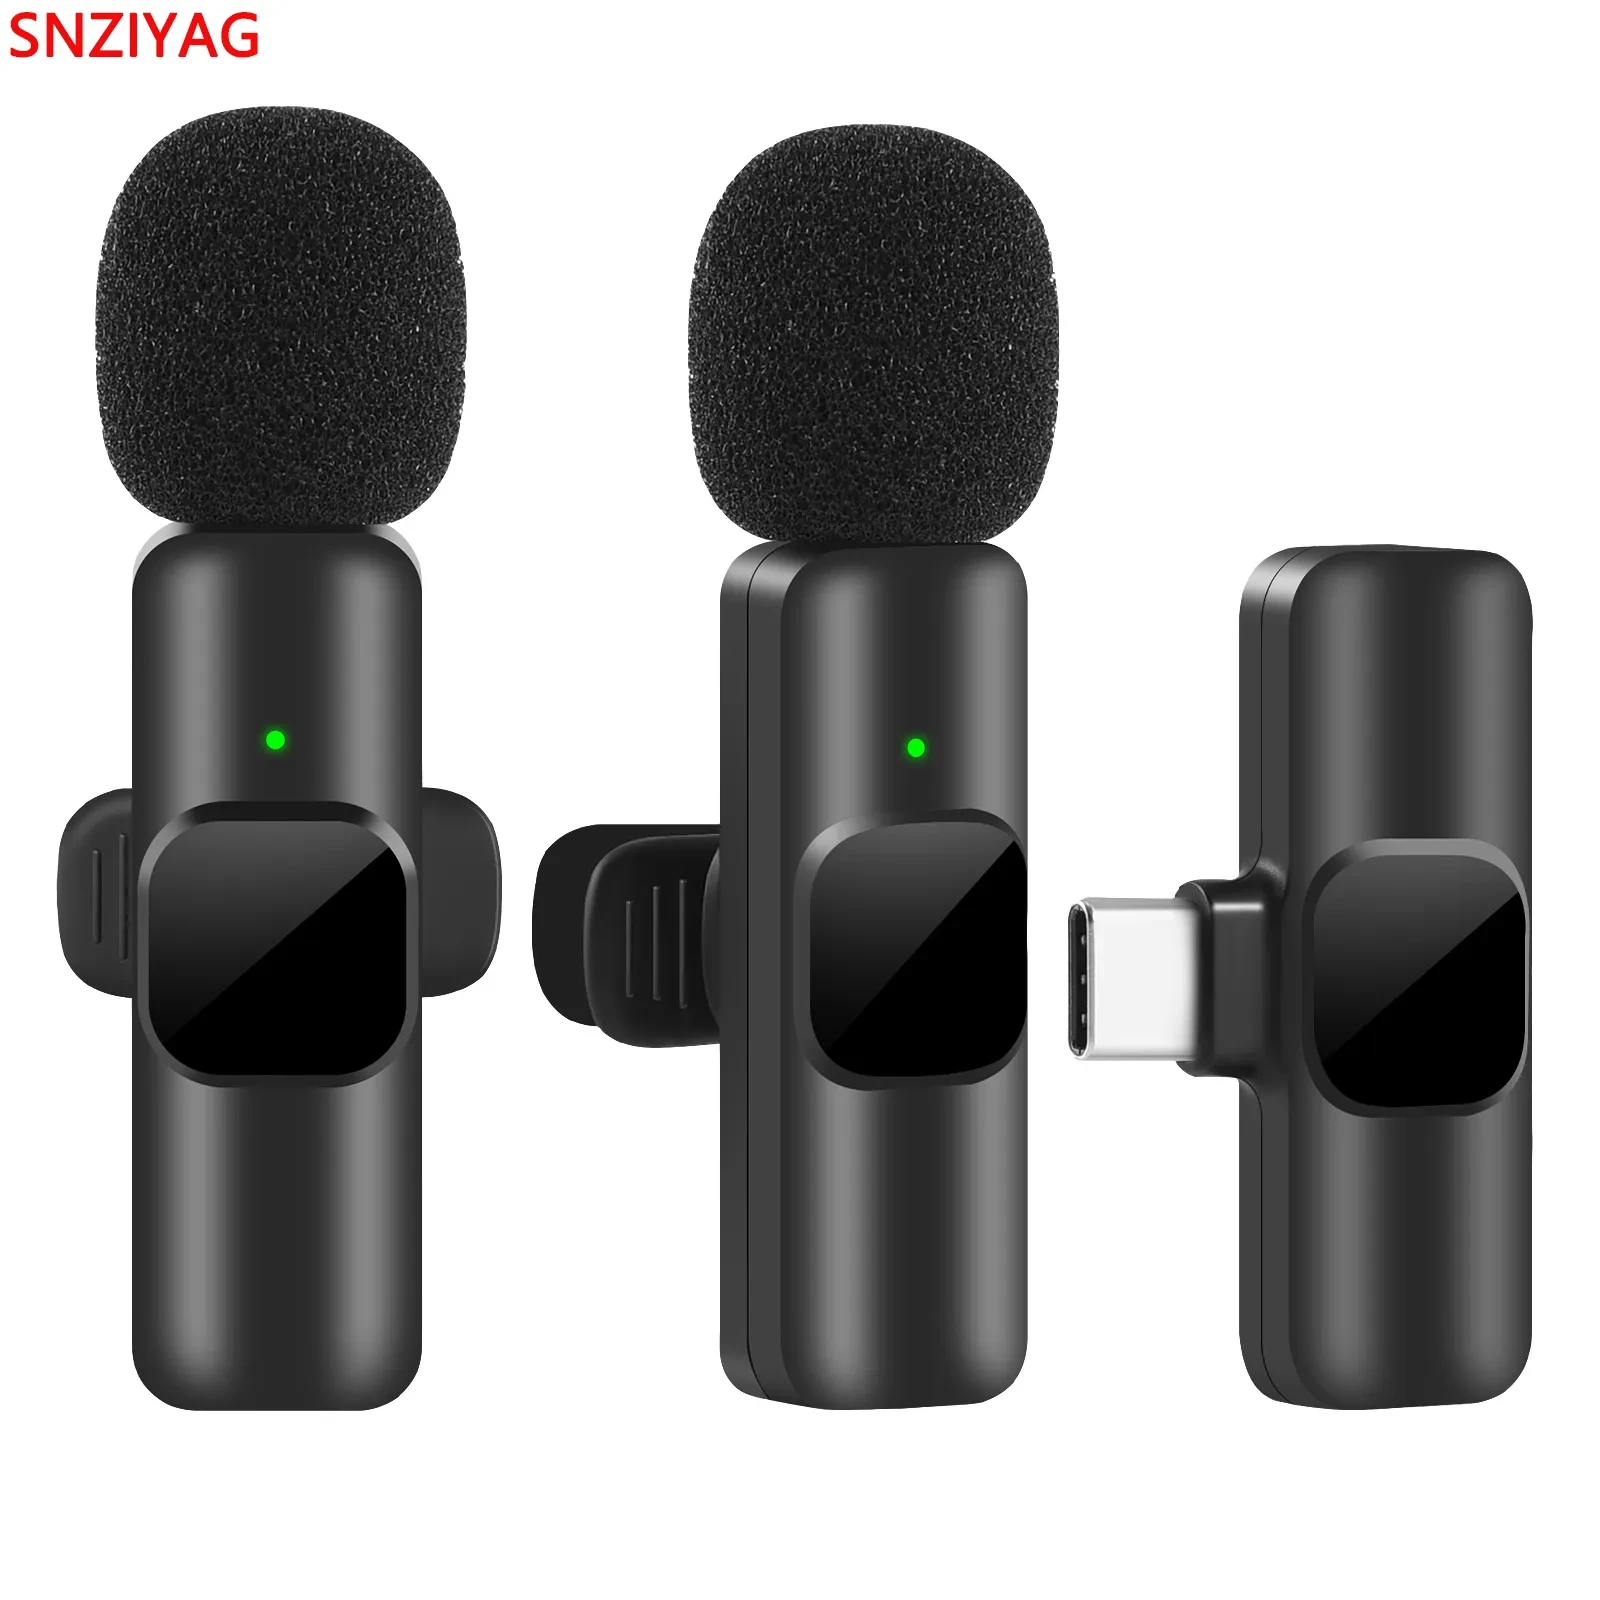 SNZIYAG Y22 New Wireless Lavalier Microphone Portable Audio Video Recording Mic For IPhone Android Live Game Mobile Phone Camera